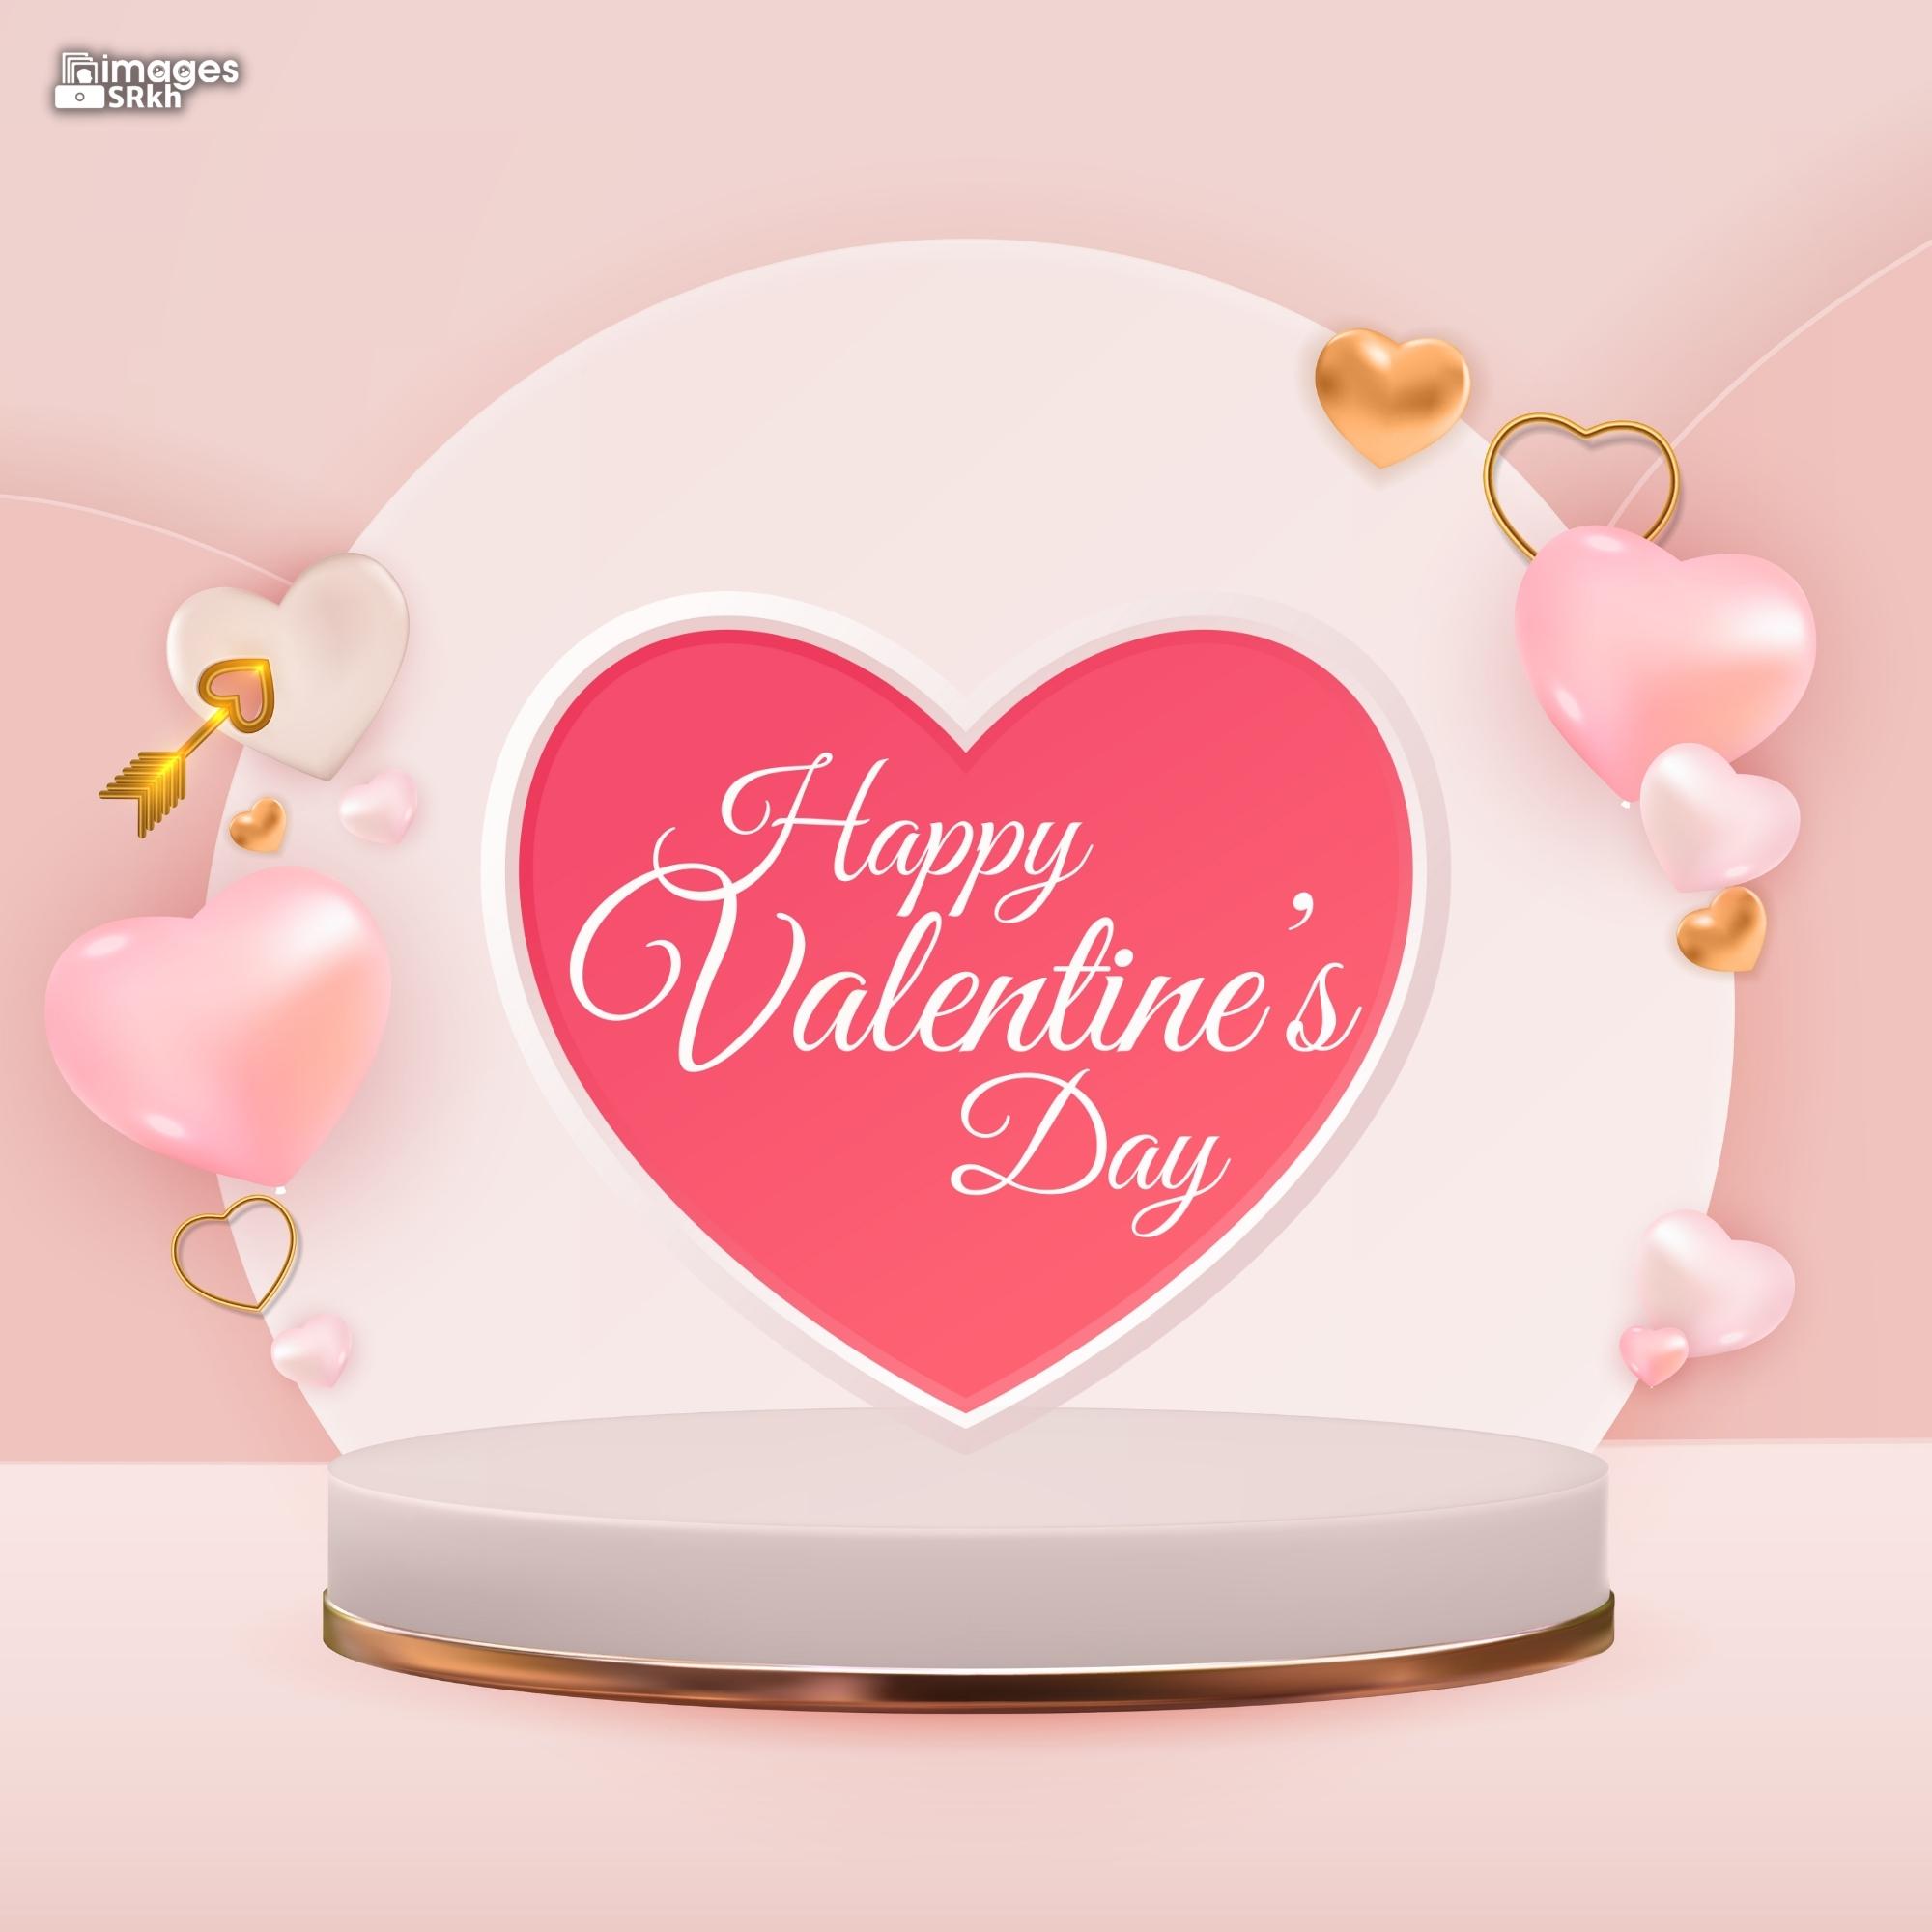 Happy Valentines Day | 454 | PREMIUM IMAGES | Wishes for Love